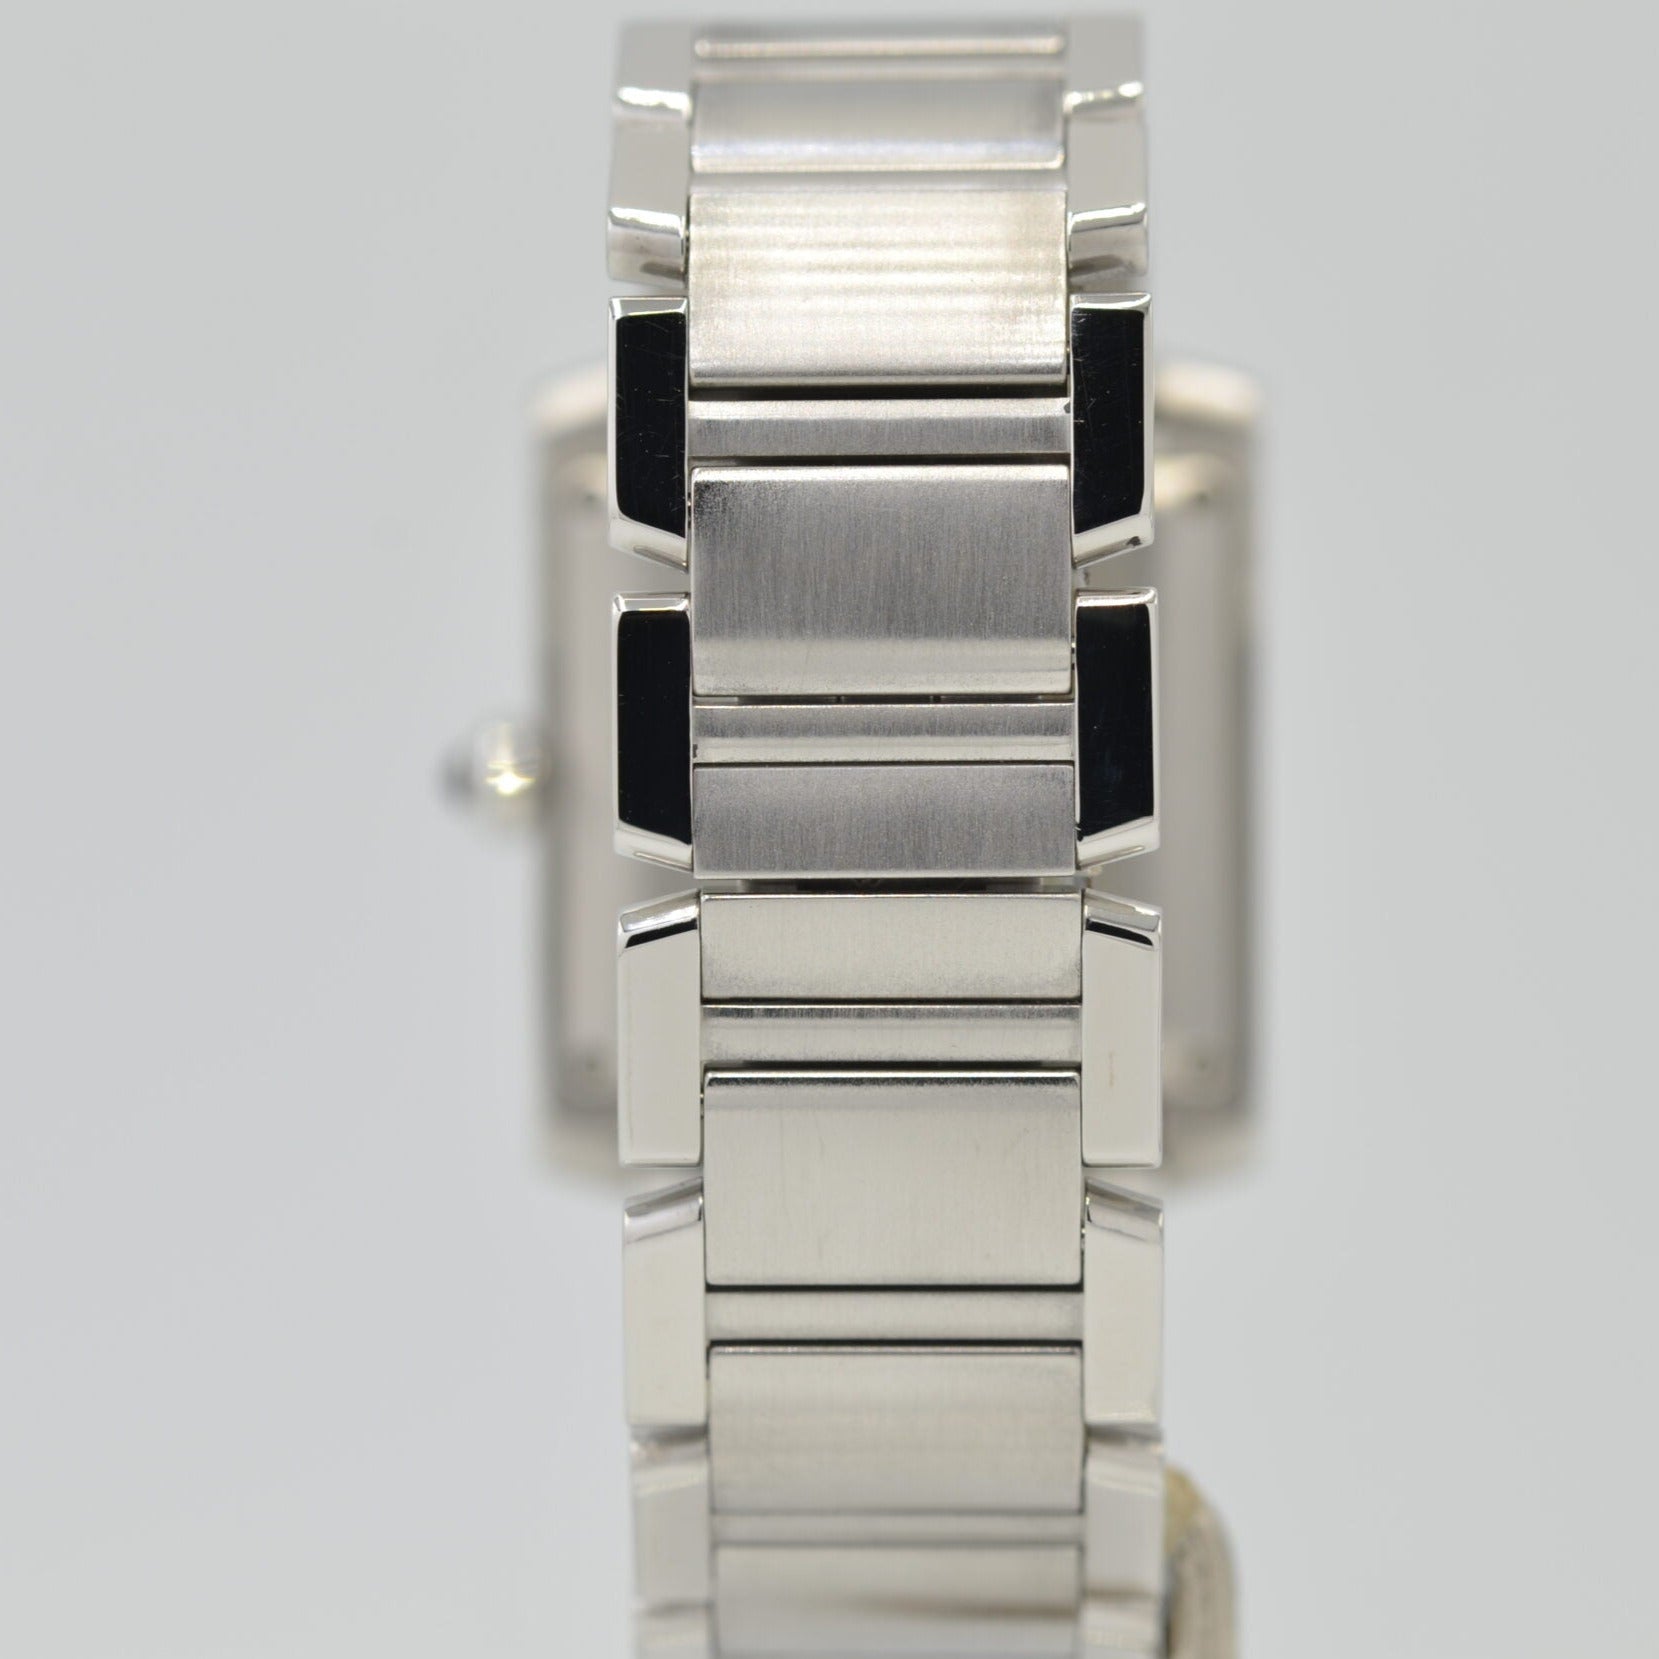 [Cartier] Tank Francaese LM stainless steel